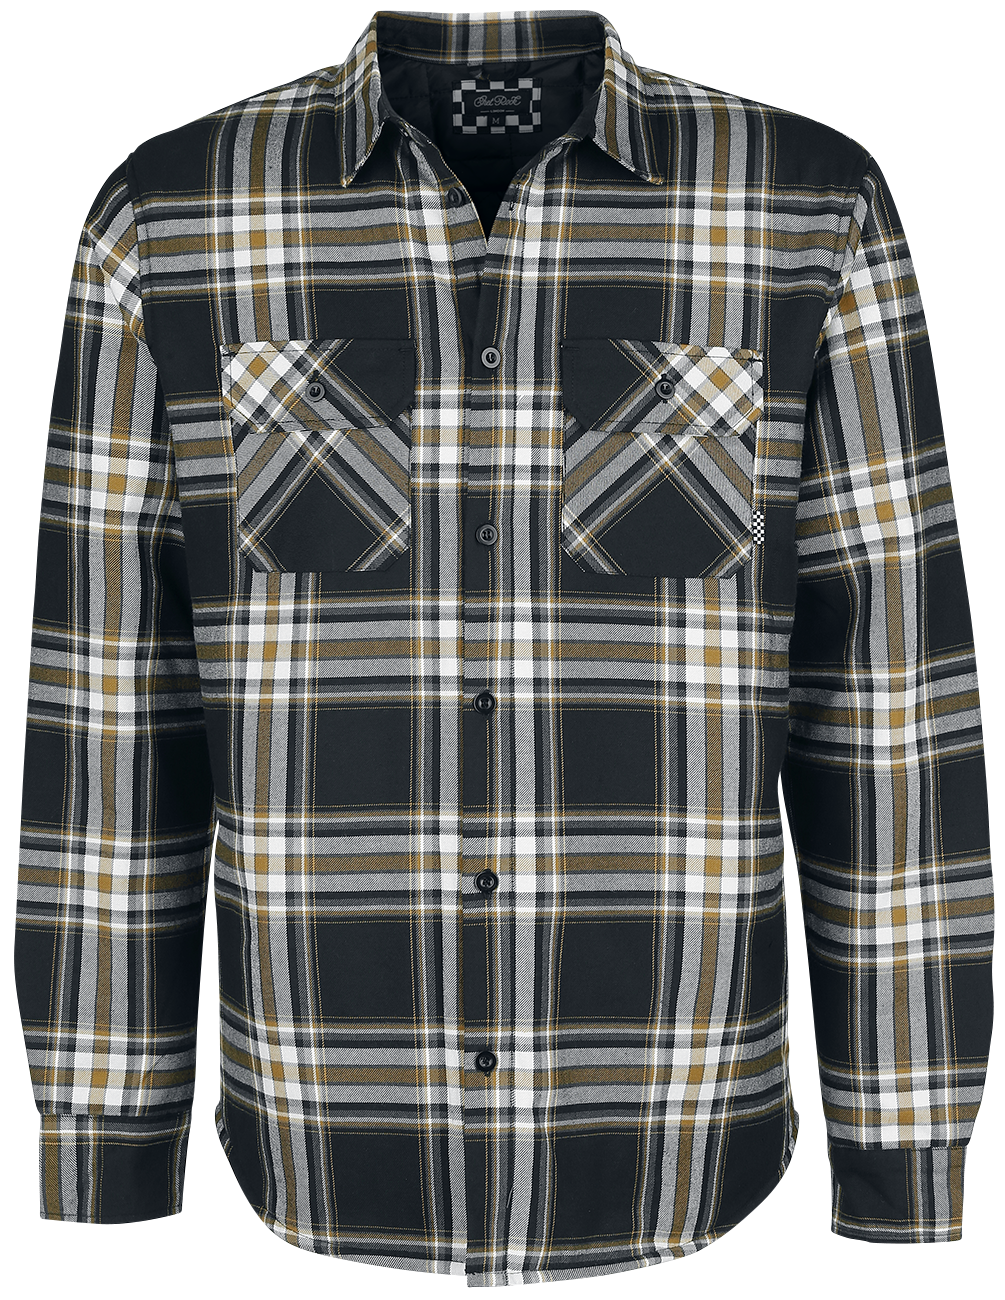 Chet Rock - Flannel Thermo-Shirt - Shirt - black-white image